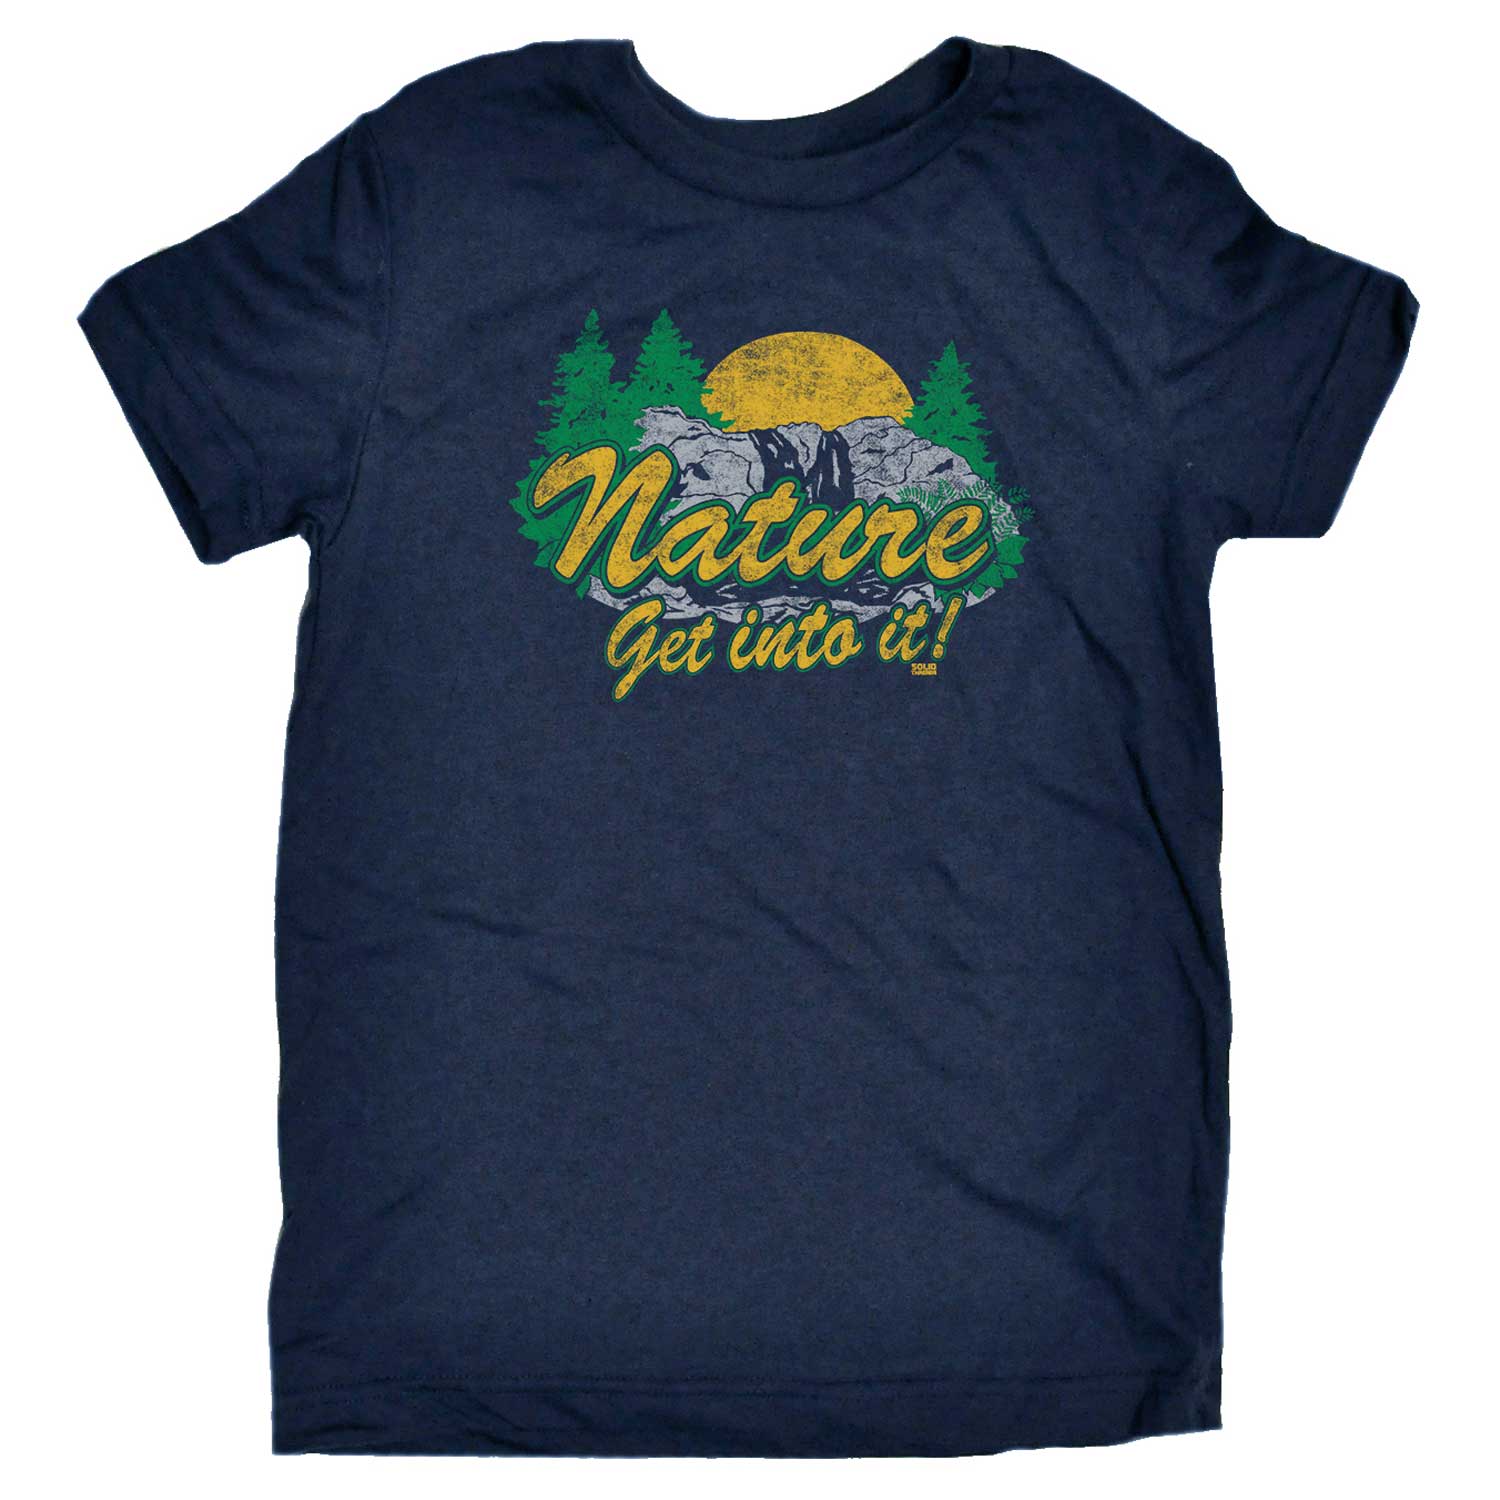 Kids Nature Get Into It Cool Hiking Graphic T-Shirt | Cute Retro Outdoorsy Tee | Solid Threads